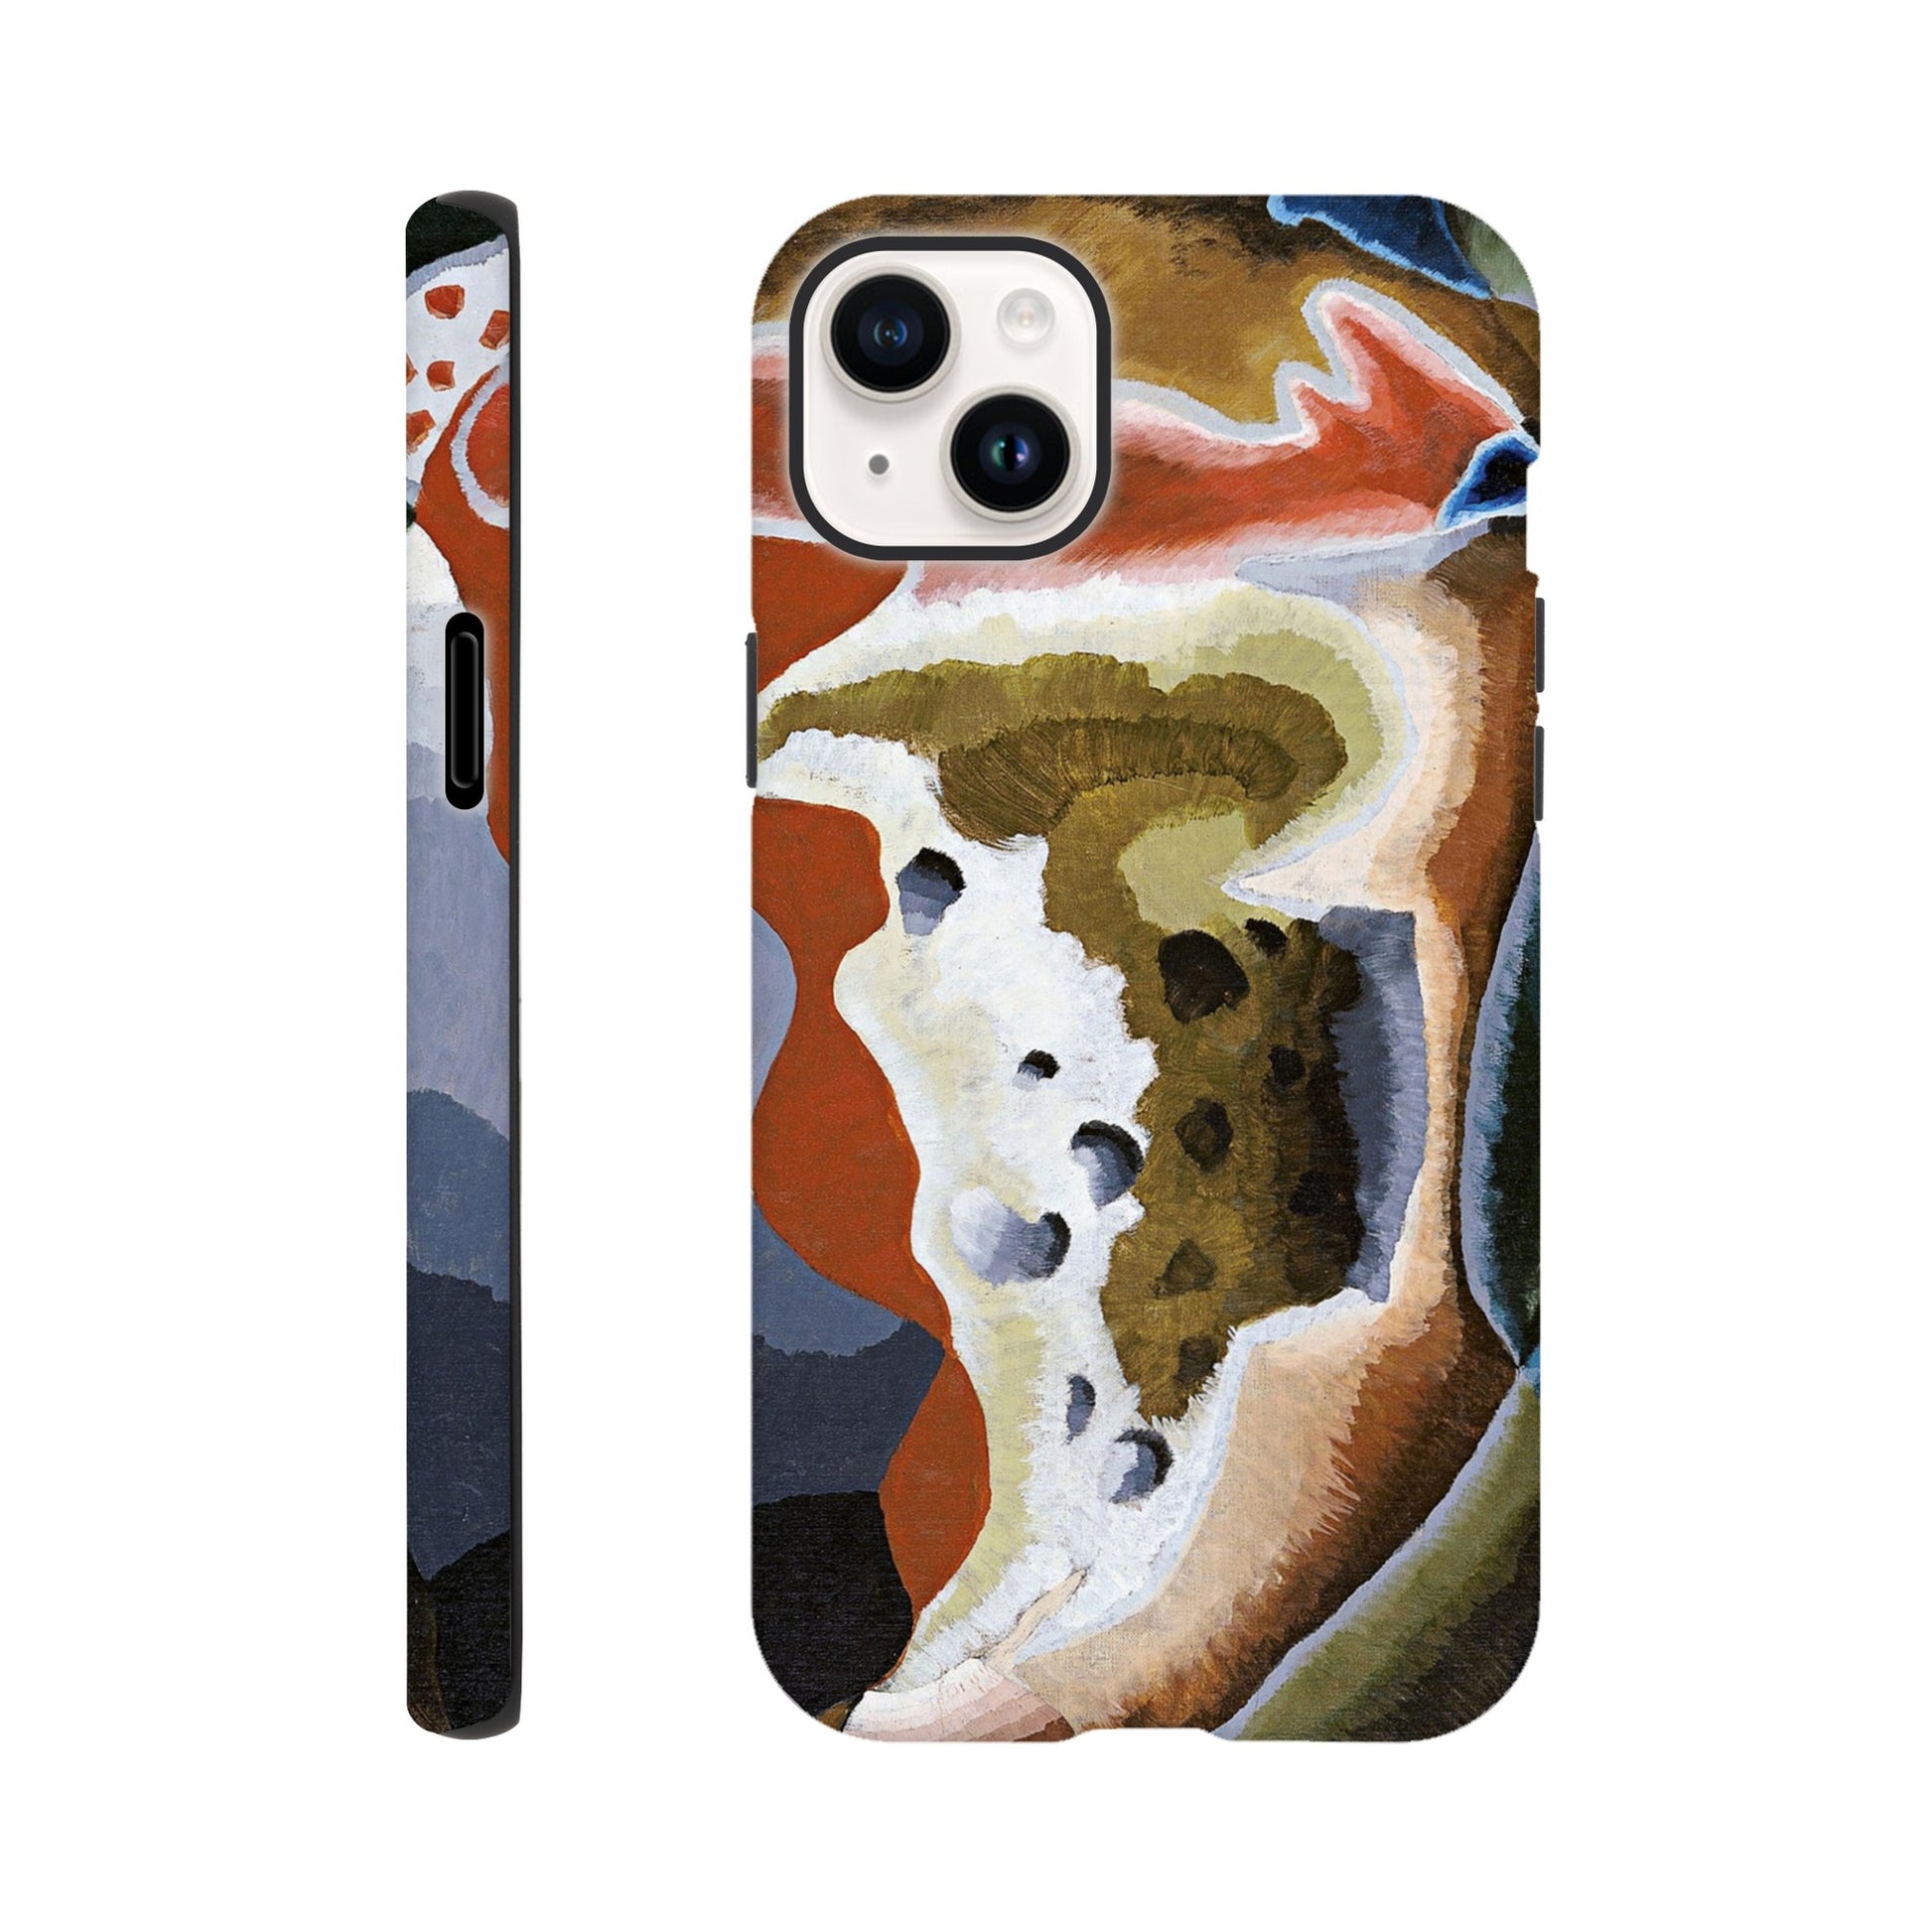 a phone case with a painting on it